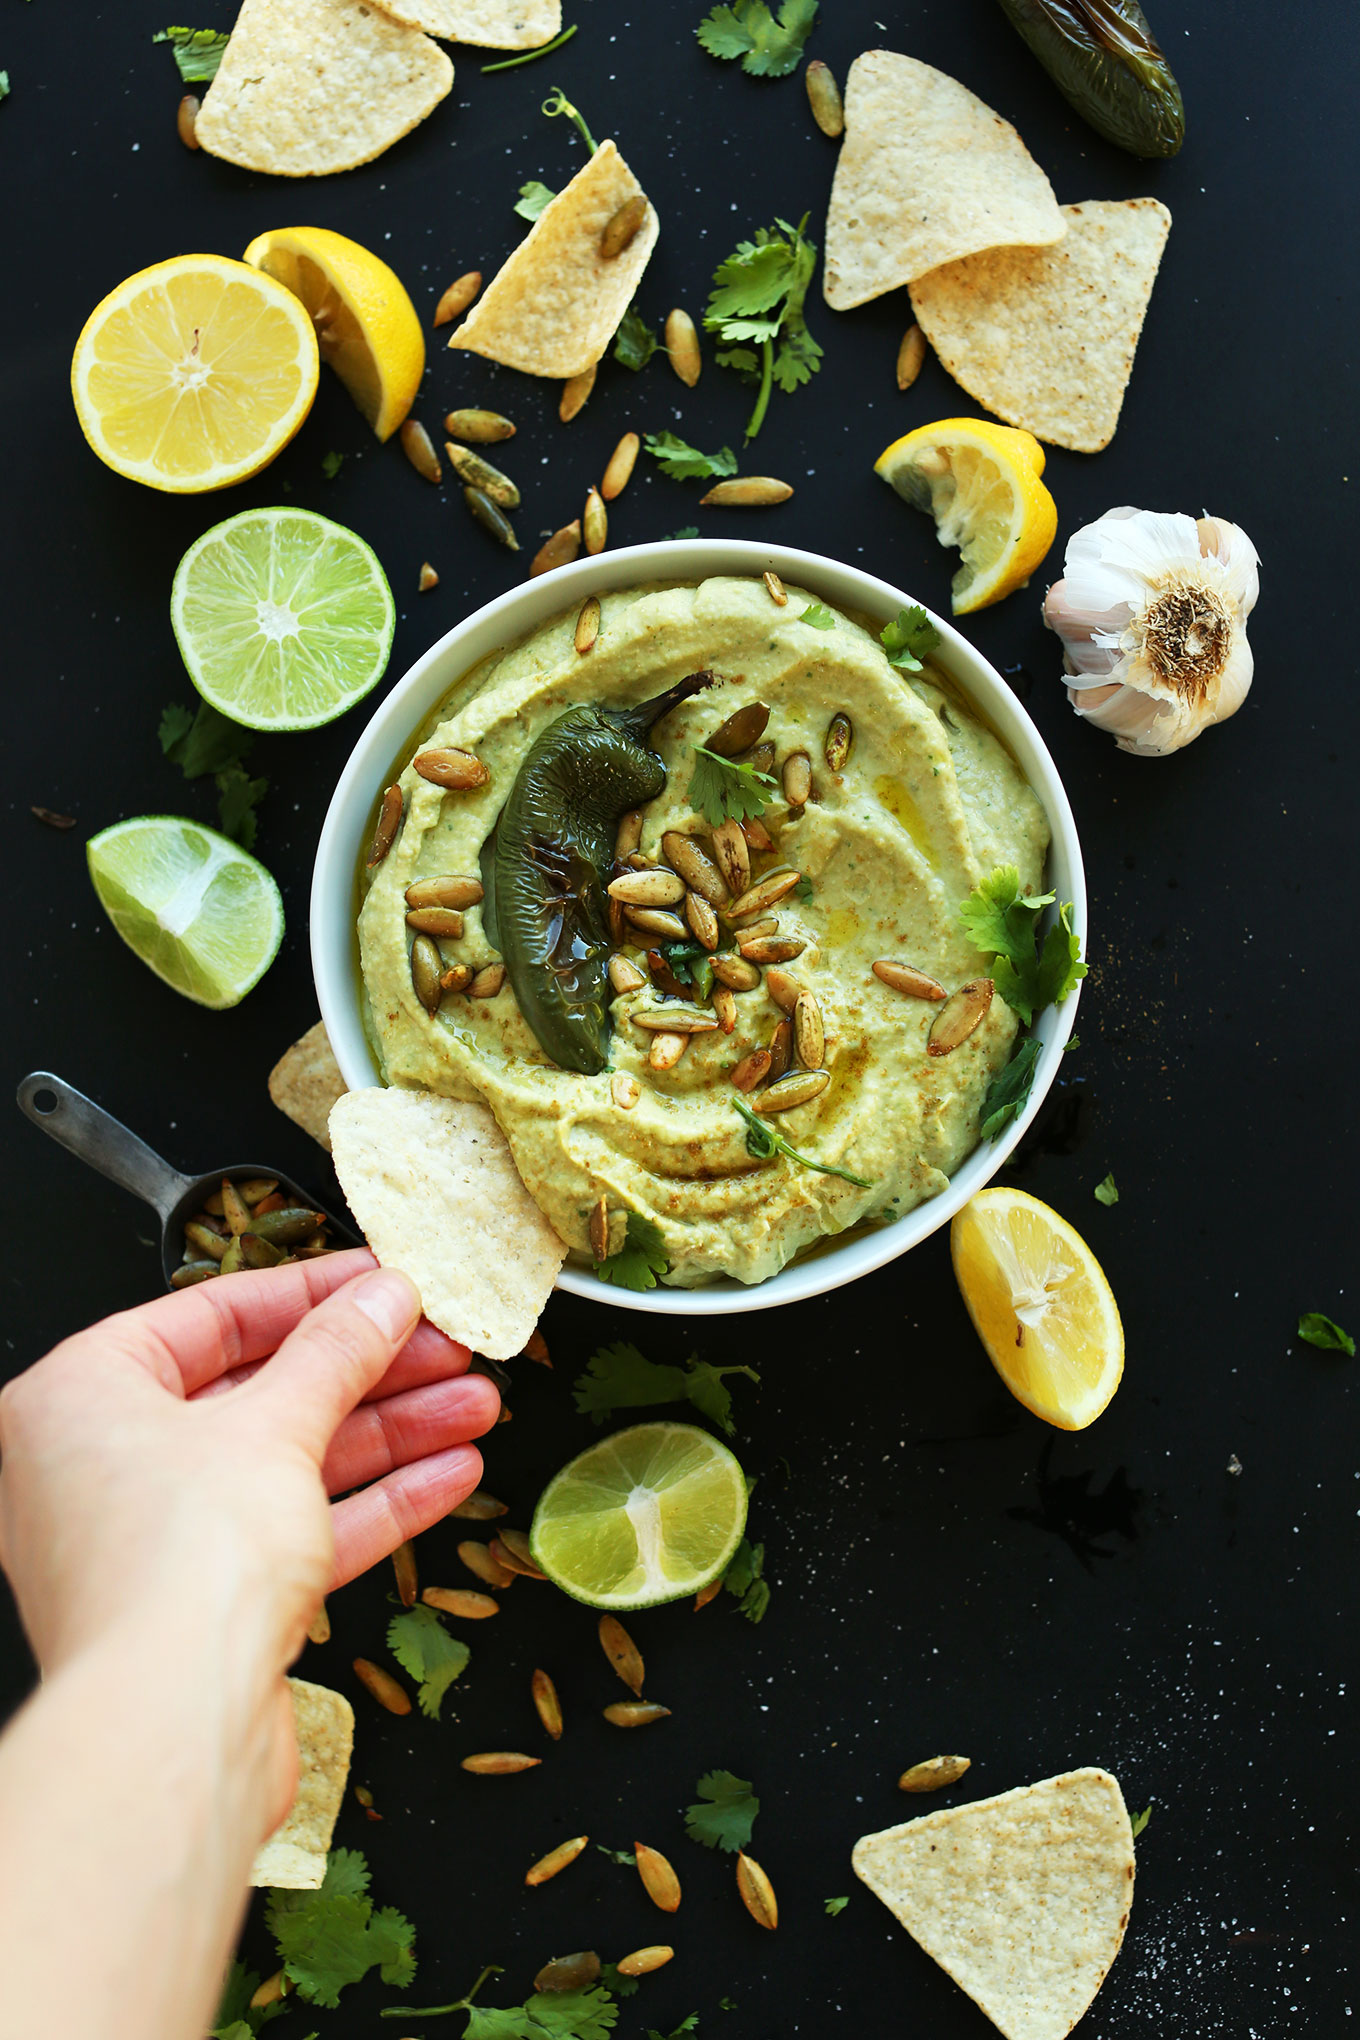 Dipping a tortilla chip into a bowl of our spicy Roasted Jalapeno Hummus recipe